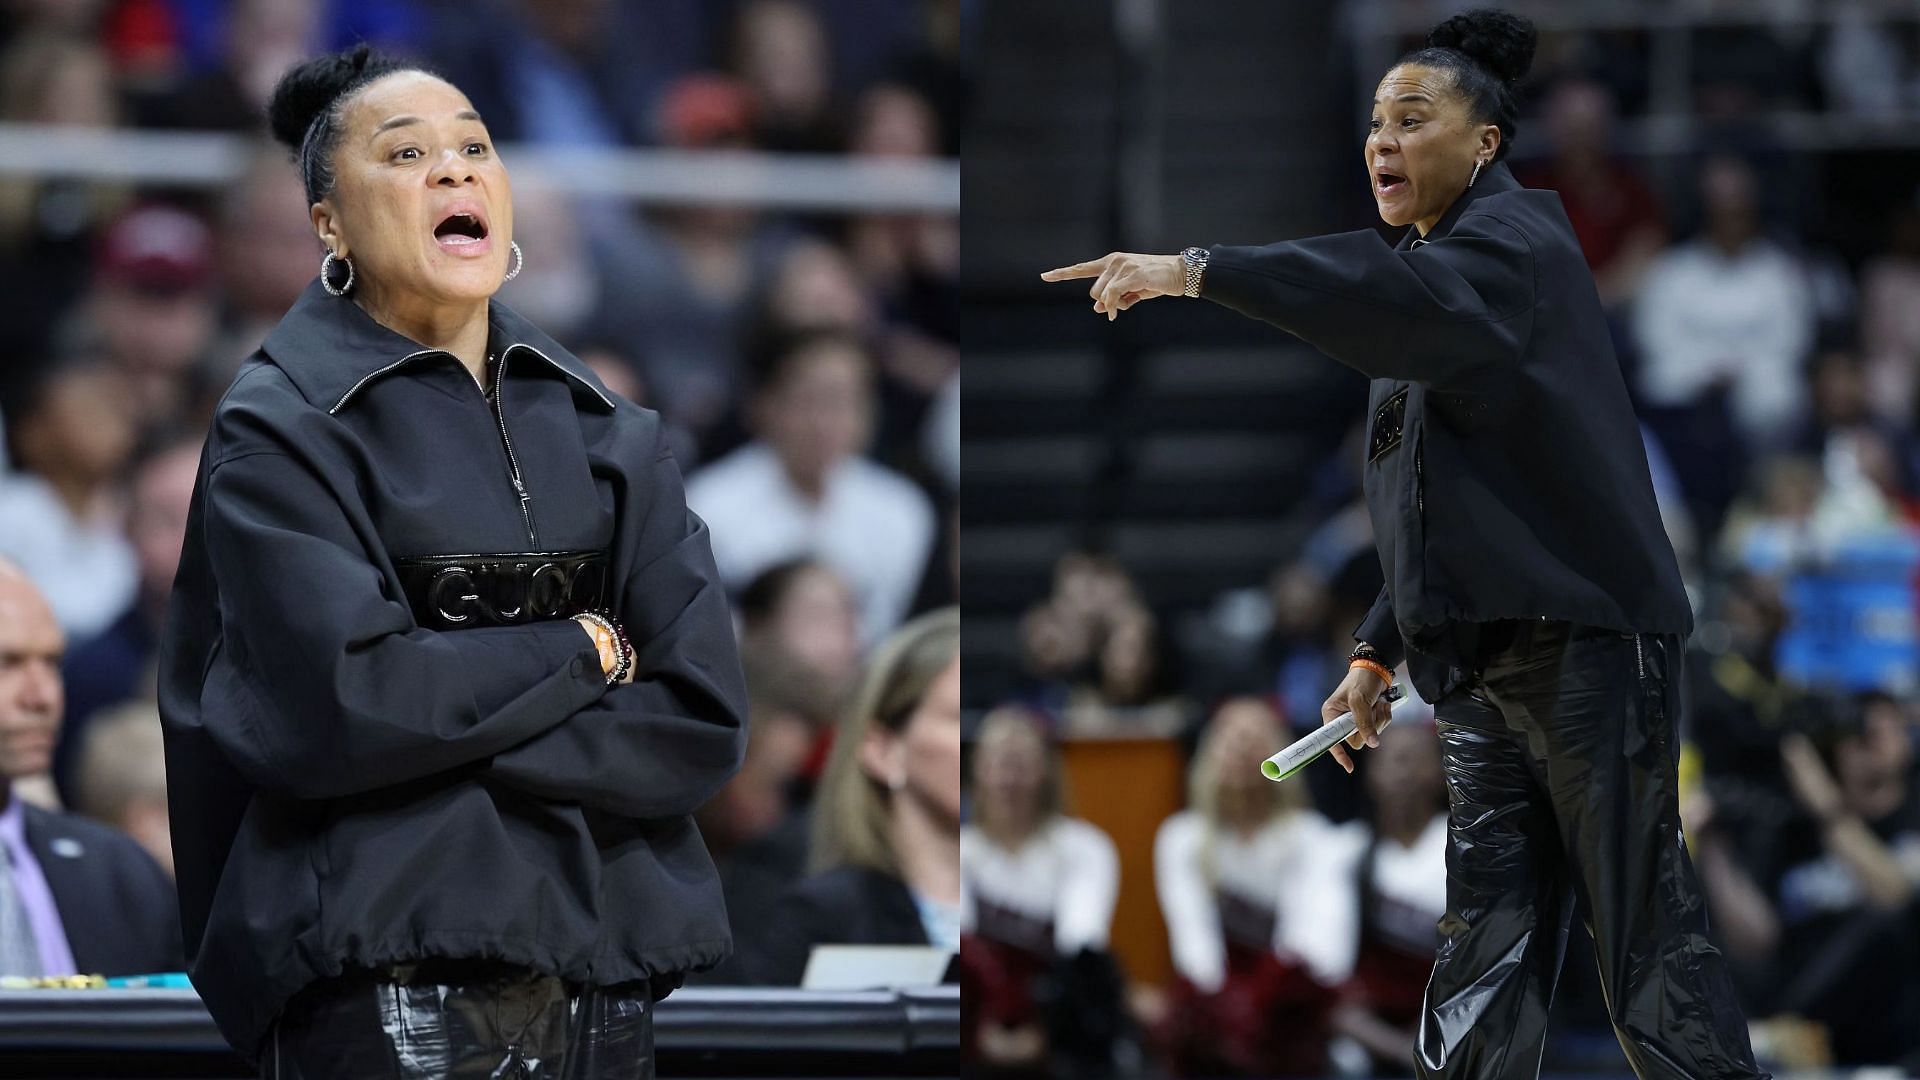 What did Dawn Staley wear in the Elite Eight matchup?